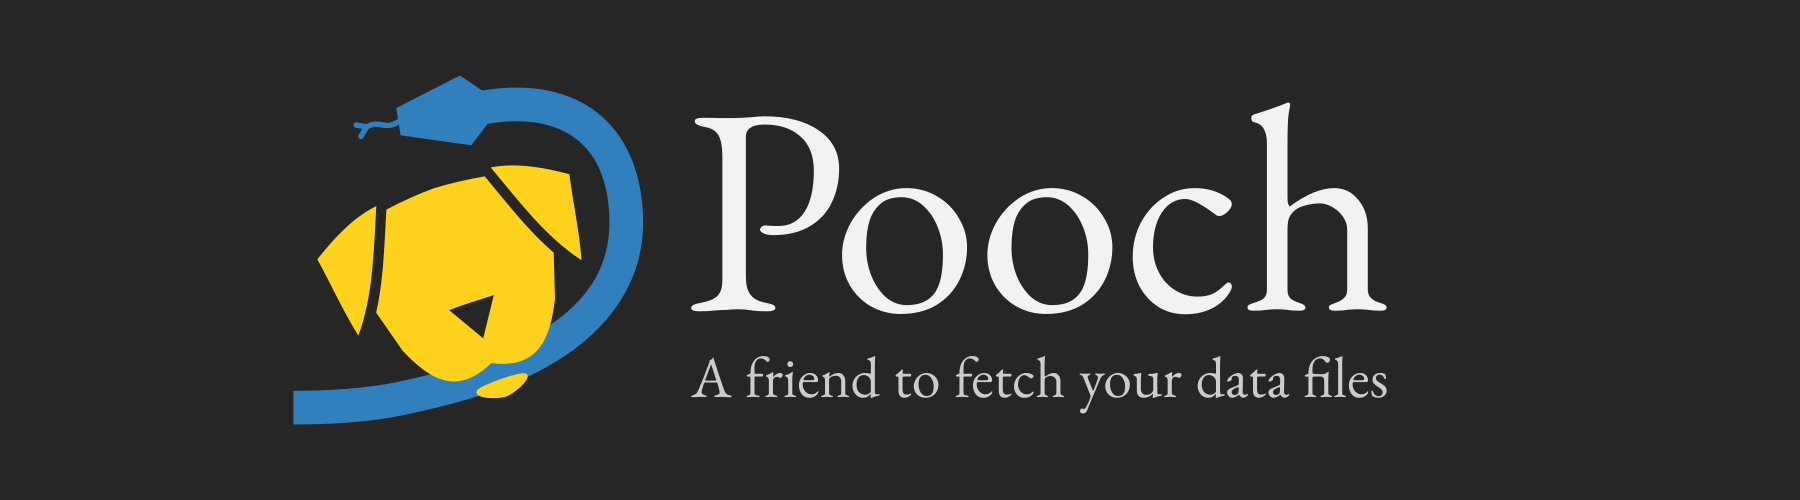 Pooch: A friend to fetch your data files